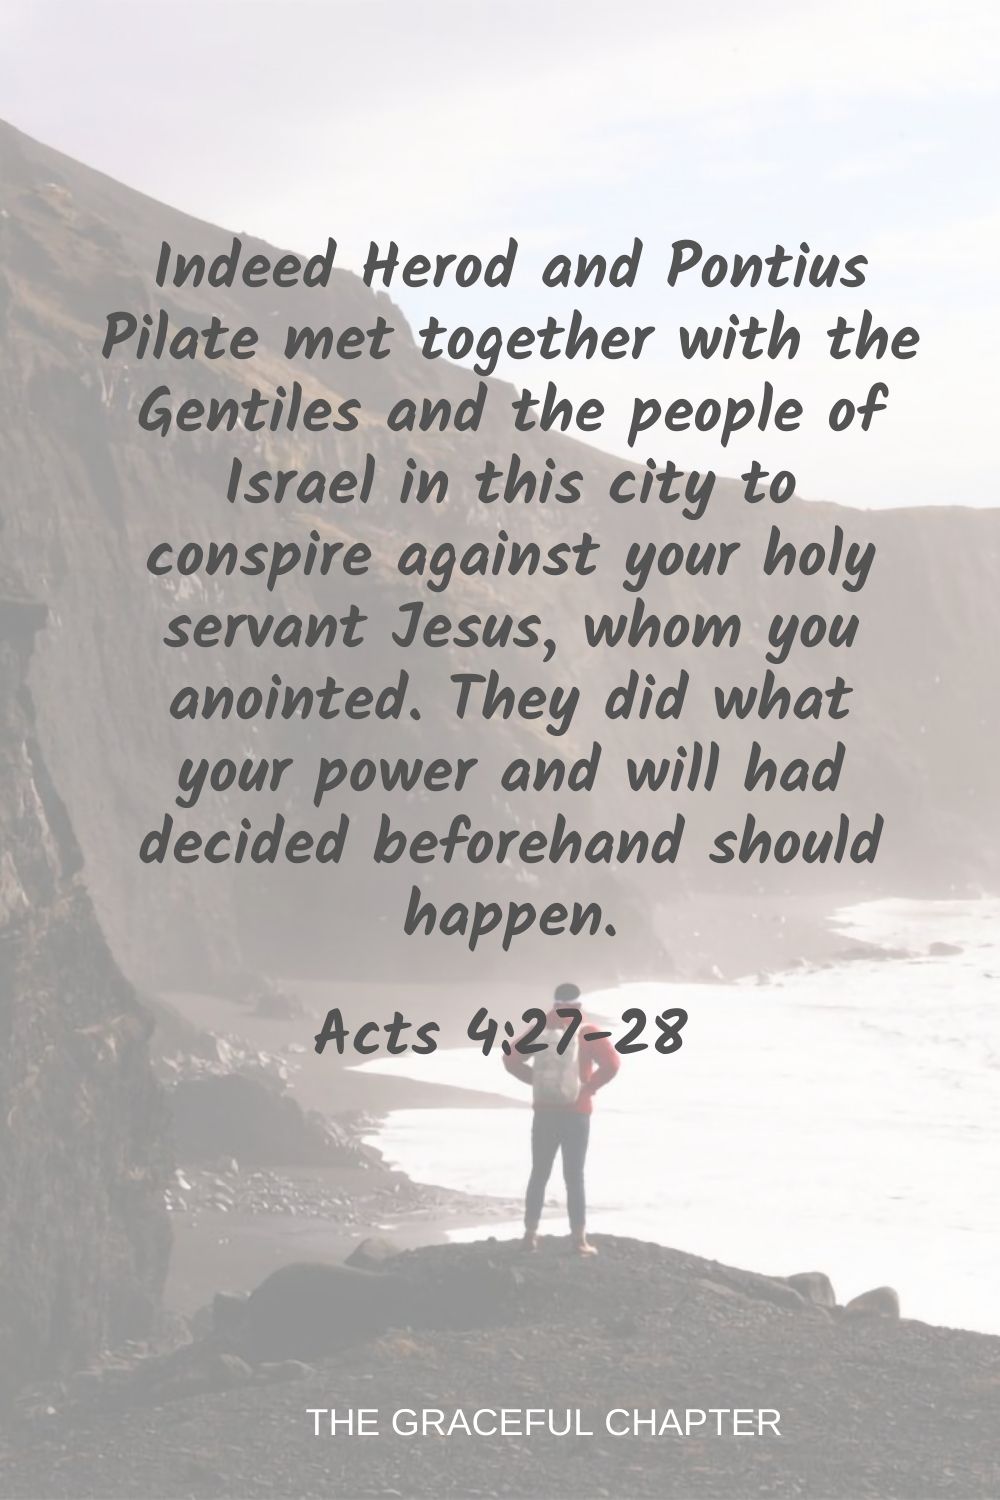 Indeed Herod and Pontius Pilate met together with the Gentiles and the people of Israel in this city to conspire against your holy servant Jesus, whom you anointed. They did what your power and will had decided beforehand should happen. Acts 4:27-28